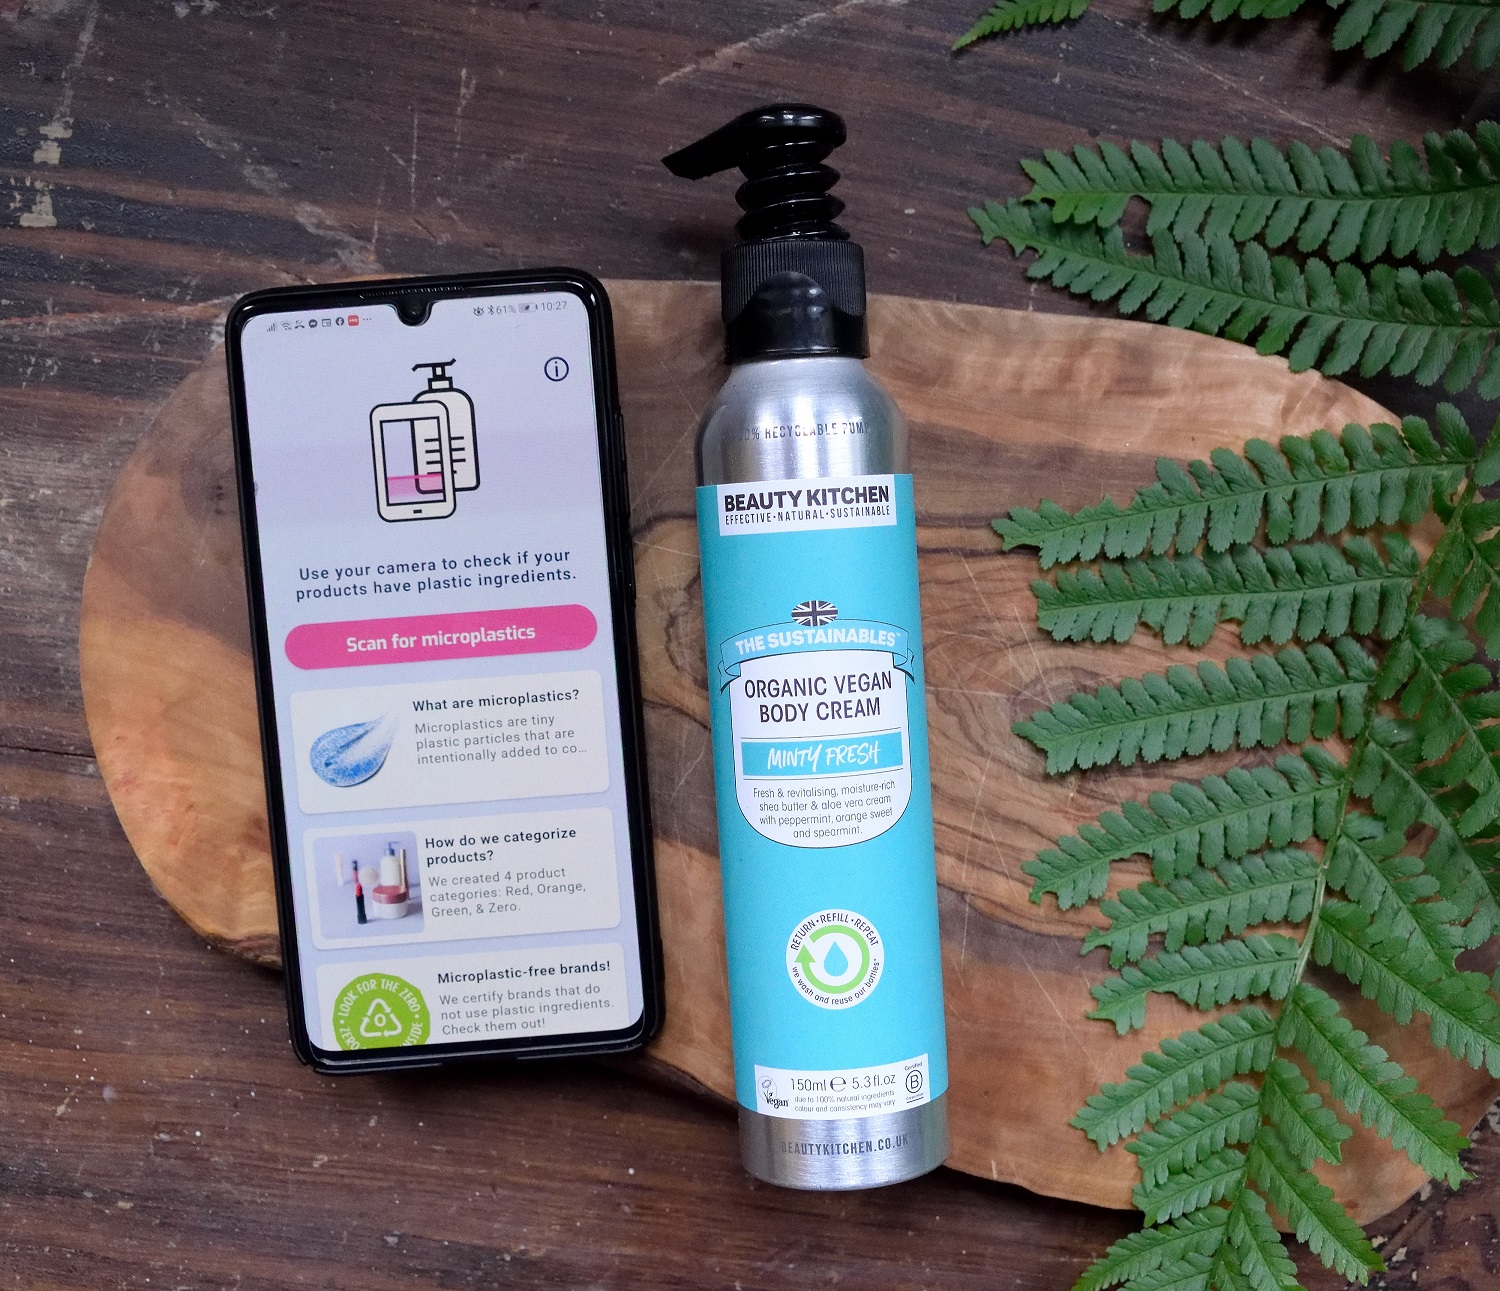 Beauty Kitchen Support Launch of New Free App to Test Products for Microplastics